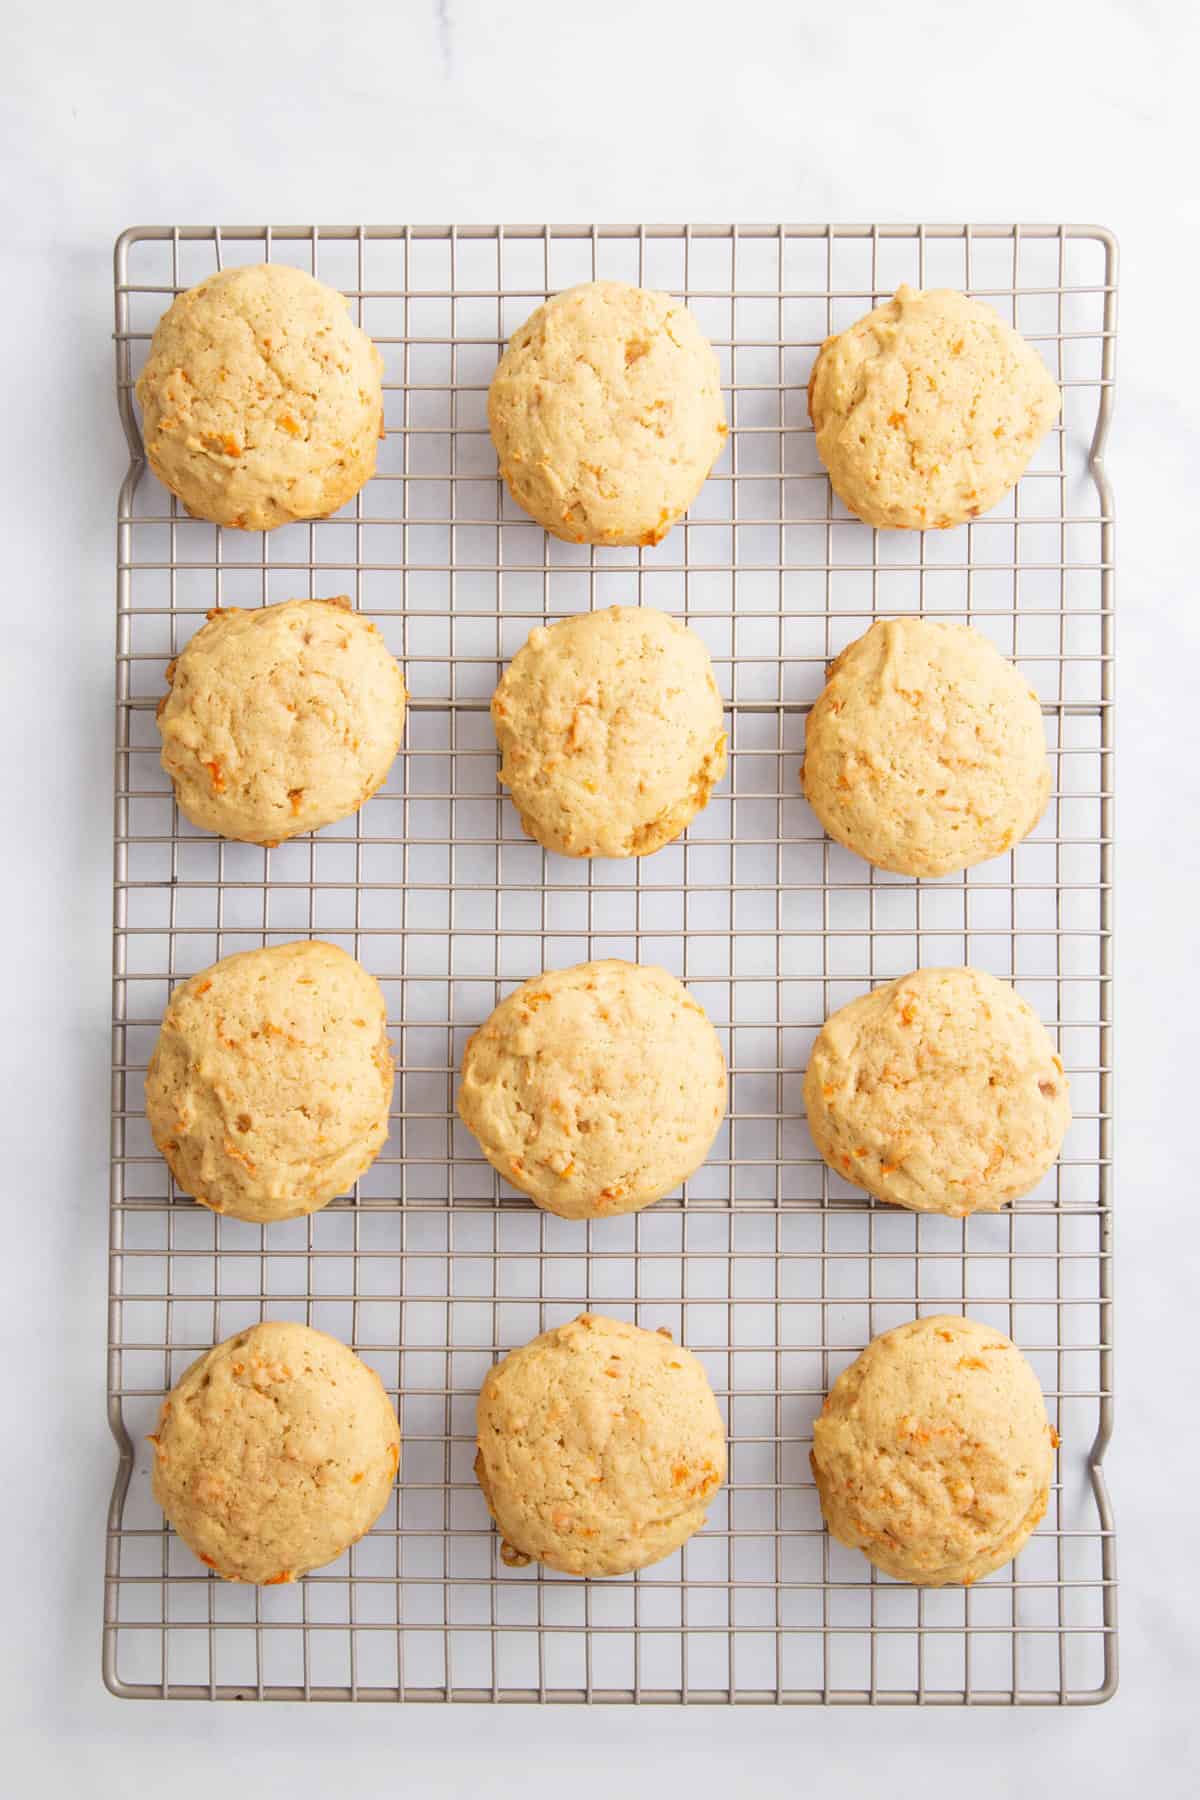 12 carrot cake cookies cooling on a wire rack